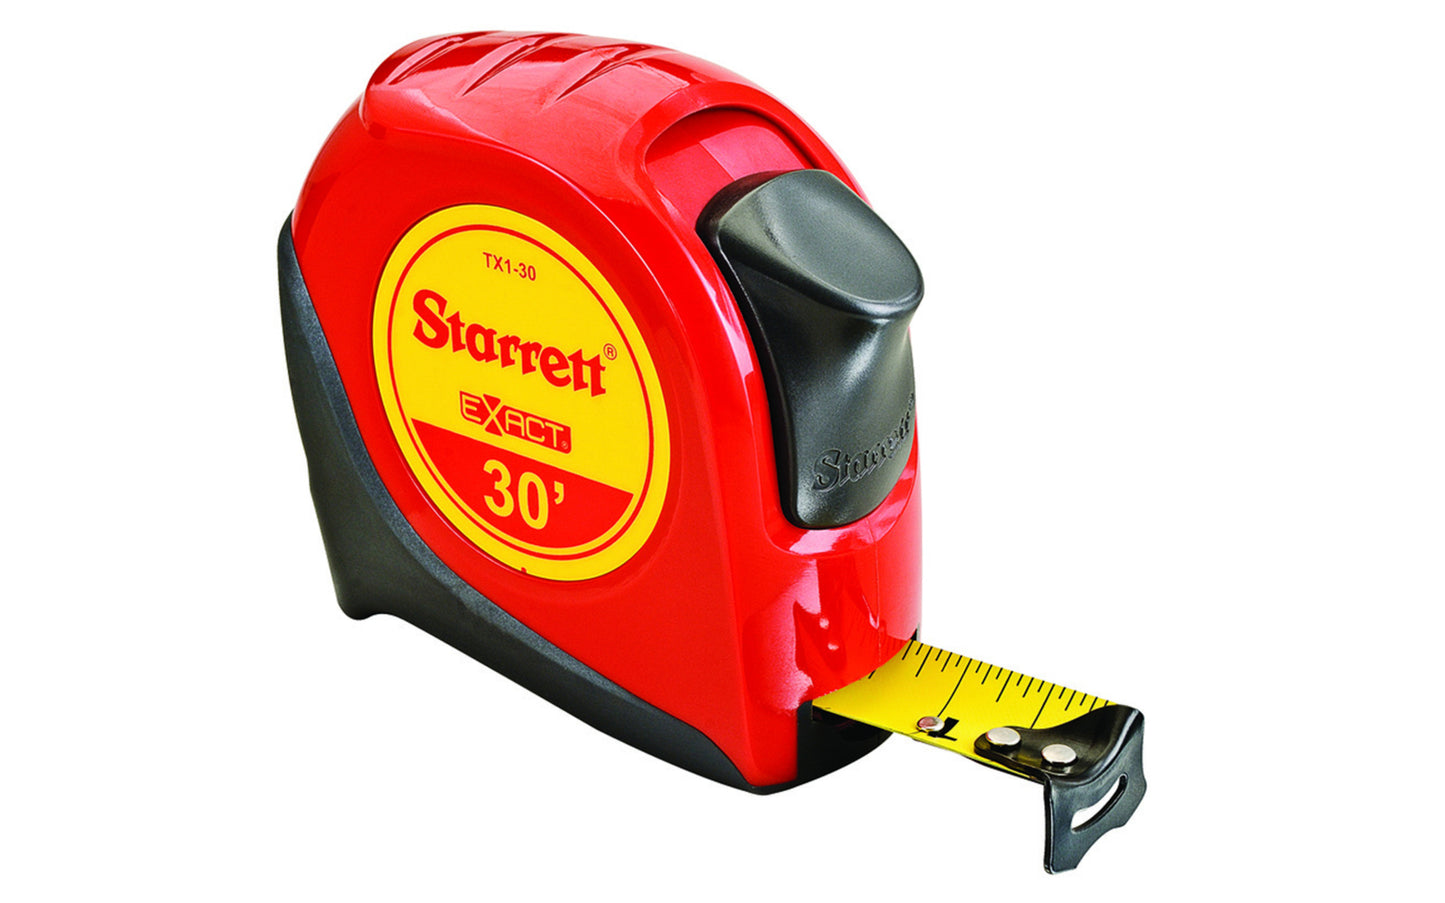 Starrett 1" x 30' Tape Measure. Produced of high durability ABS plastic for extended case life, these tape measures offer overmold for improved grip. Their ergonomic design fits comfortably in the hand and incorporate industry standard standout, and improved blade protection.